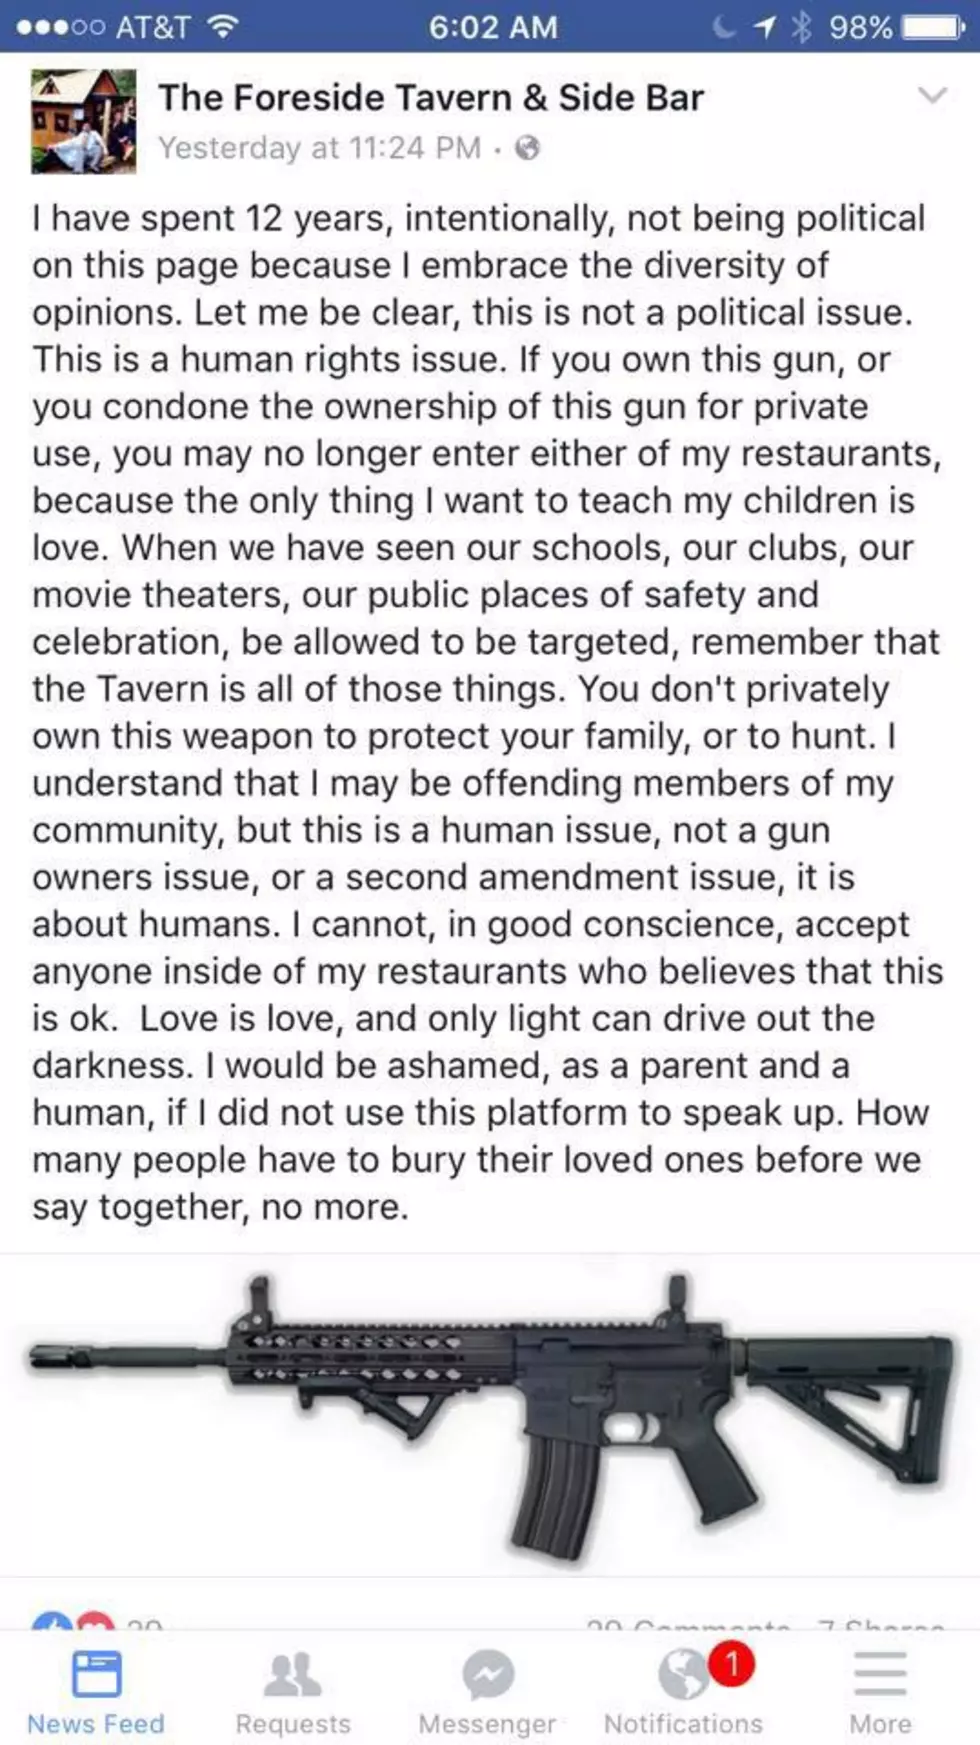 Owner Of Foreside Tavern In Falmouth Gets Ripped For Anti-Gun Facebook Post